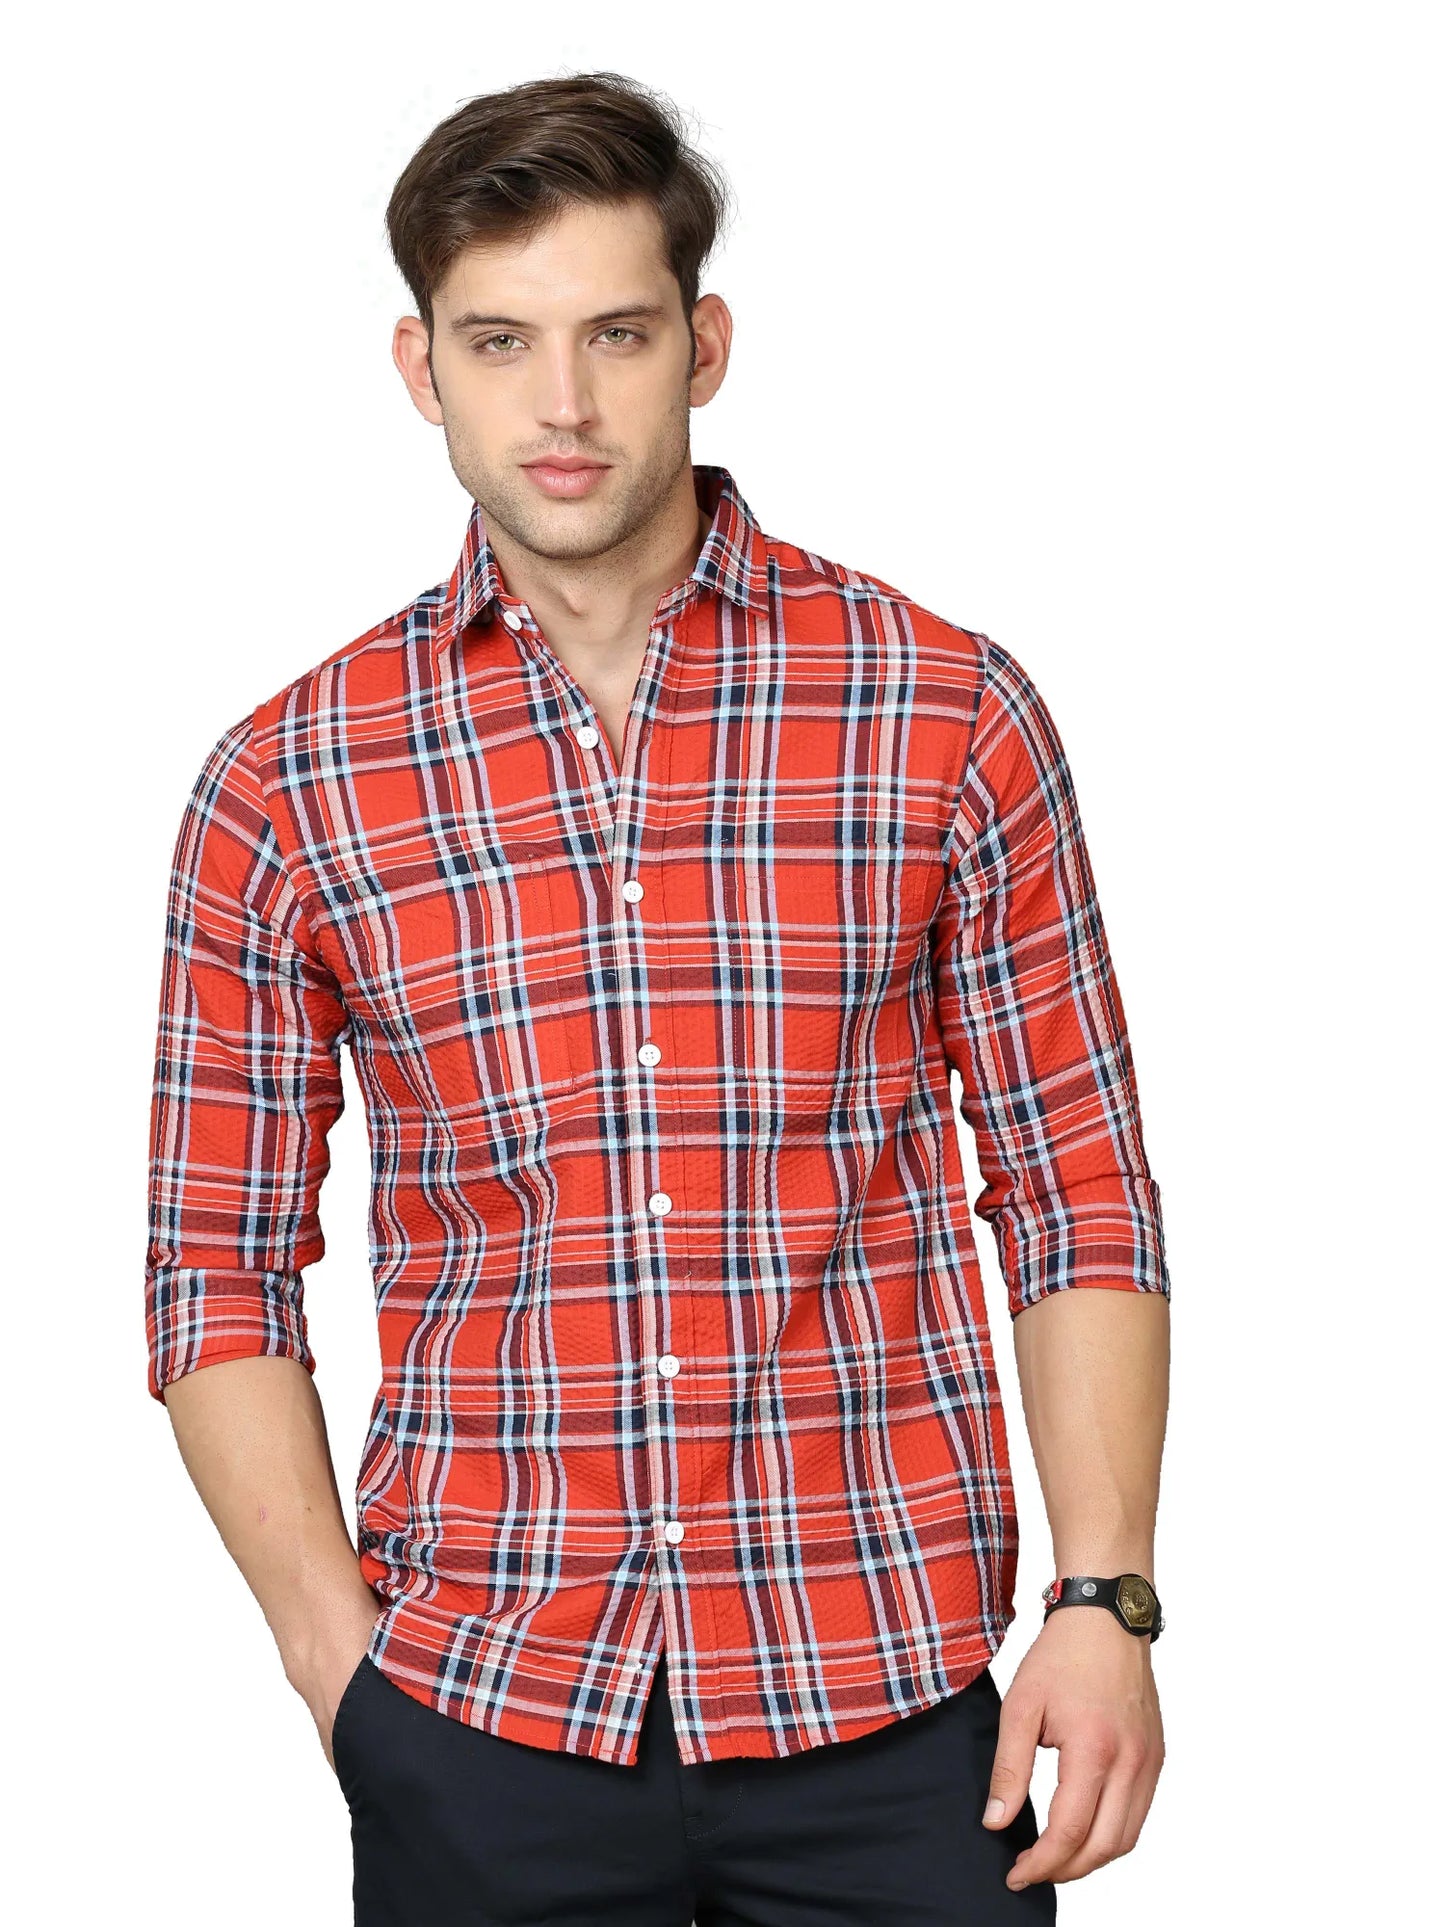 Style Cheerful Checkered Shirt for Men 